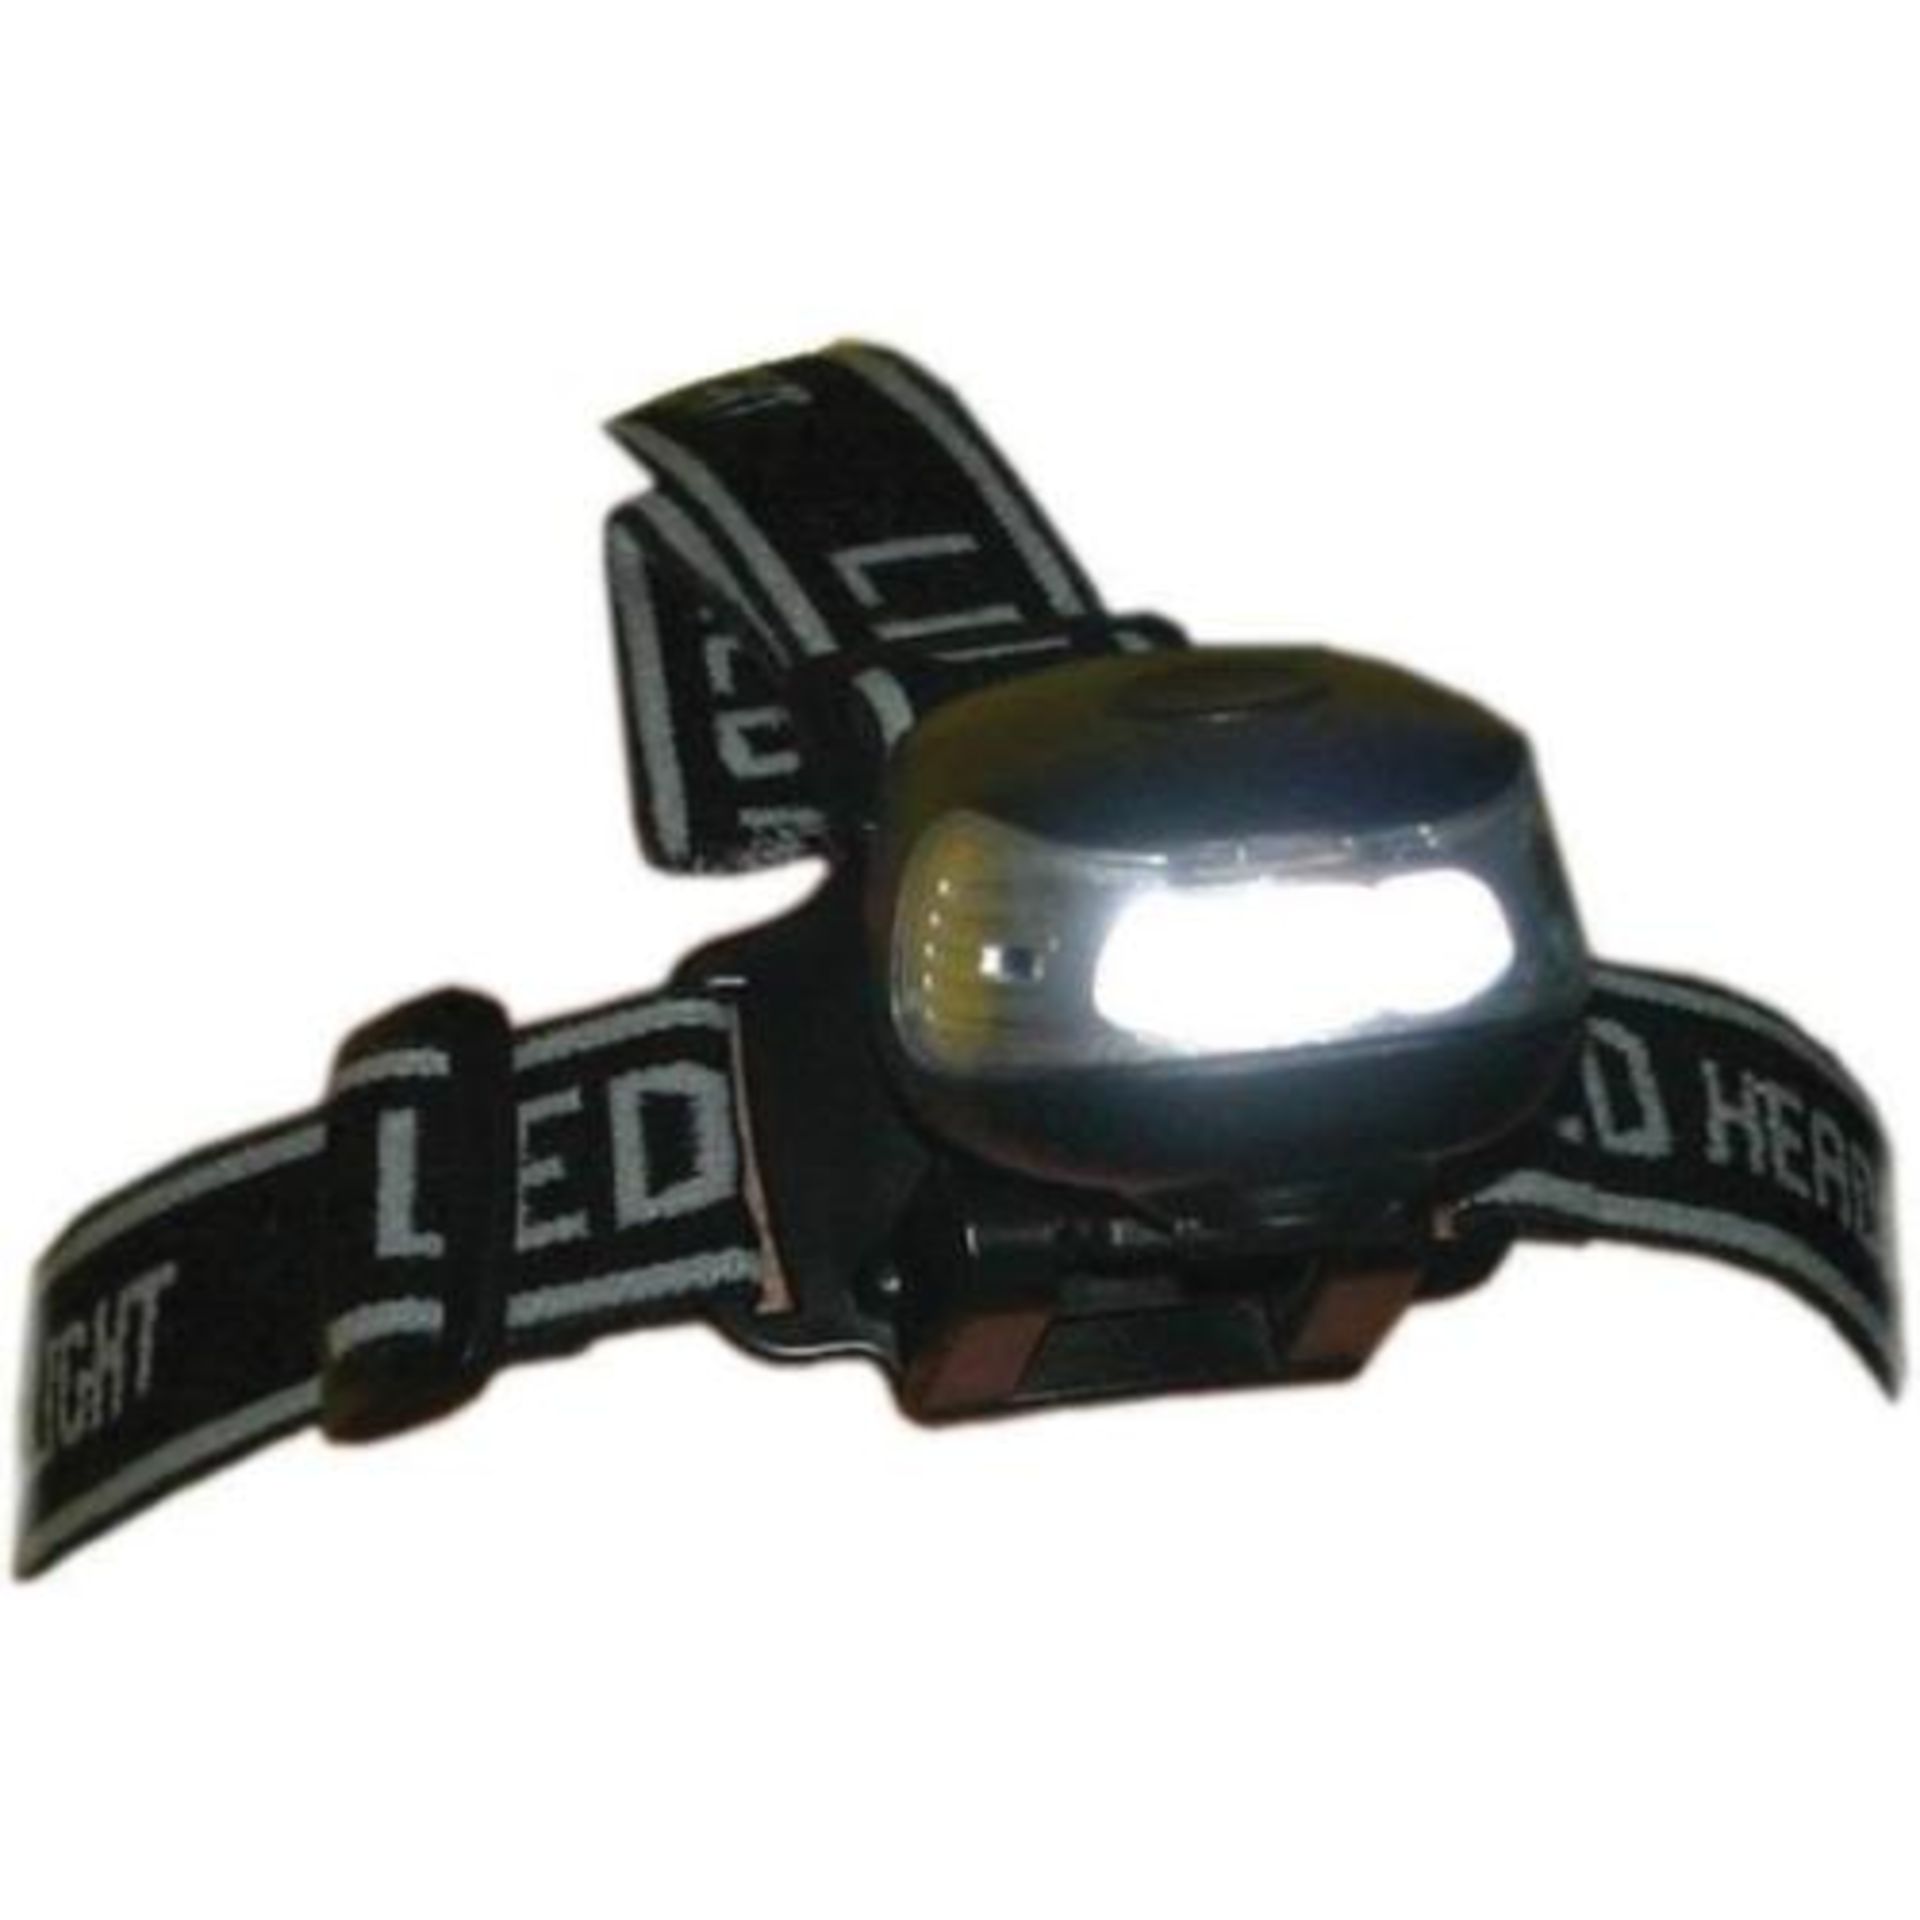 V Tritronic Optimax LED Headlamp with elastic strap and 3 leds / flasing red SRP 19.99 X  6  Bid